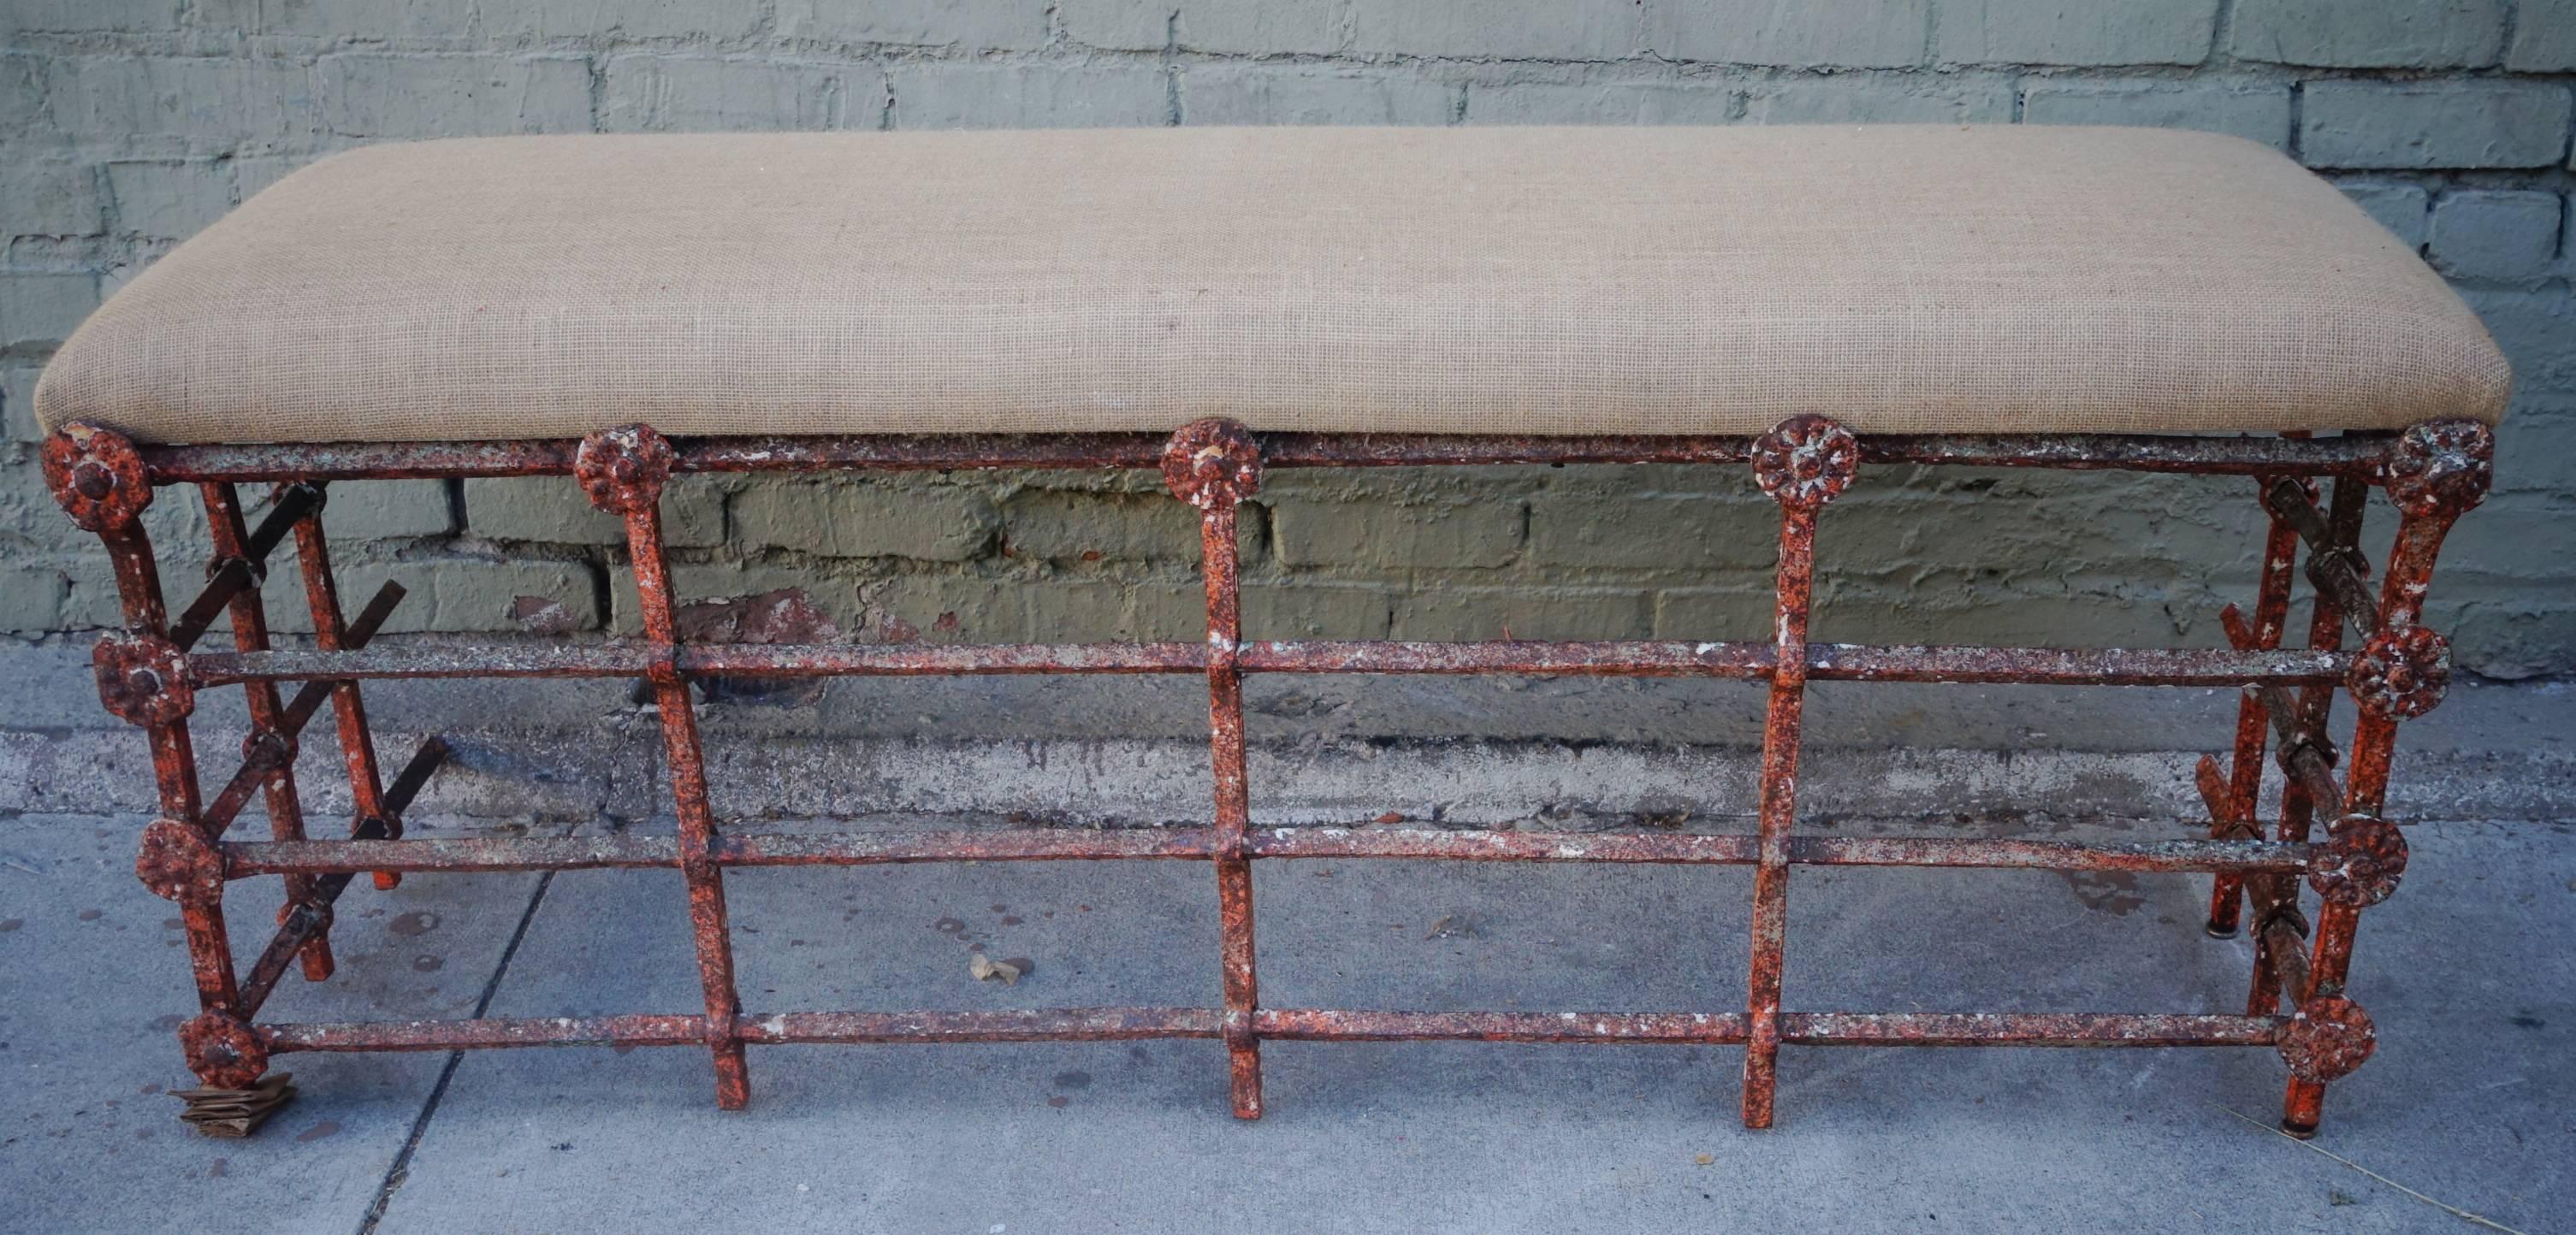 18th century Spanish painted wrought iron bench with floral rosettes throughout. Newly upholstered in Burlap textile.